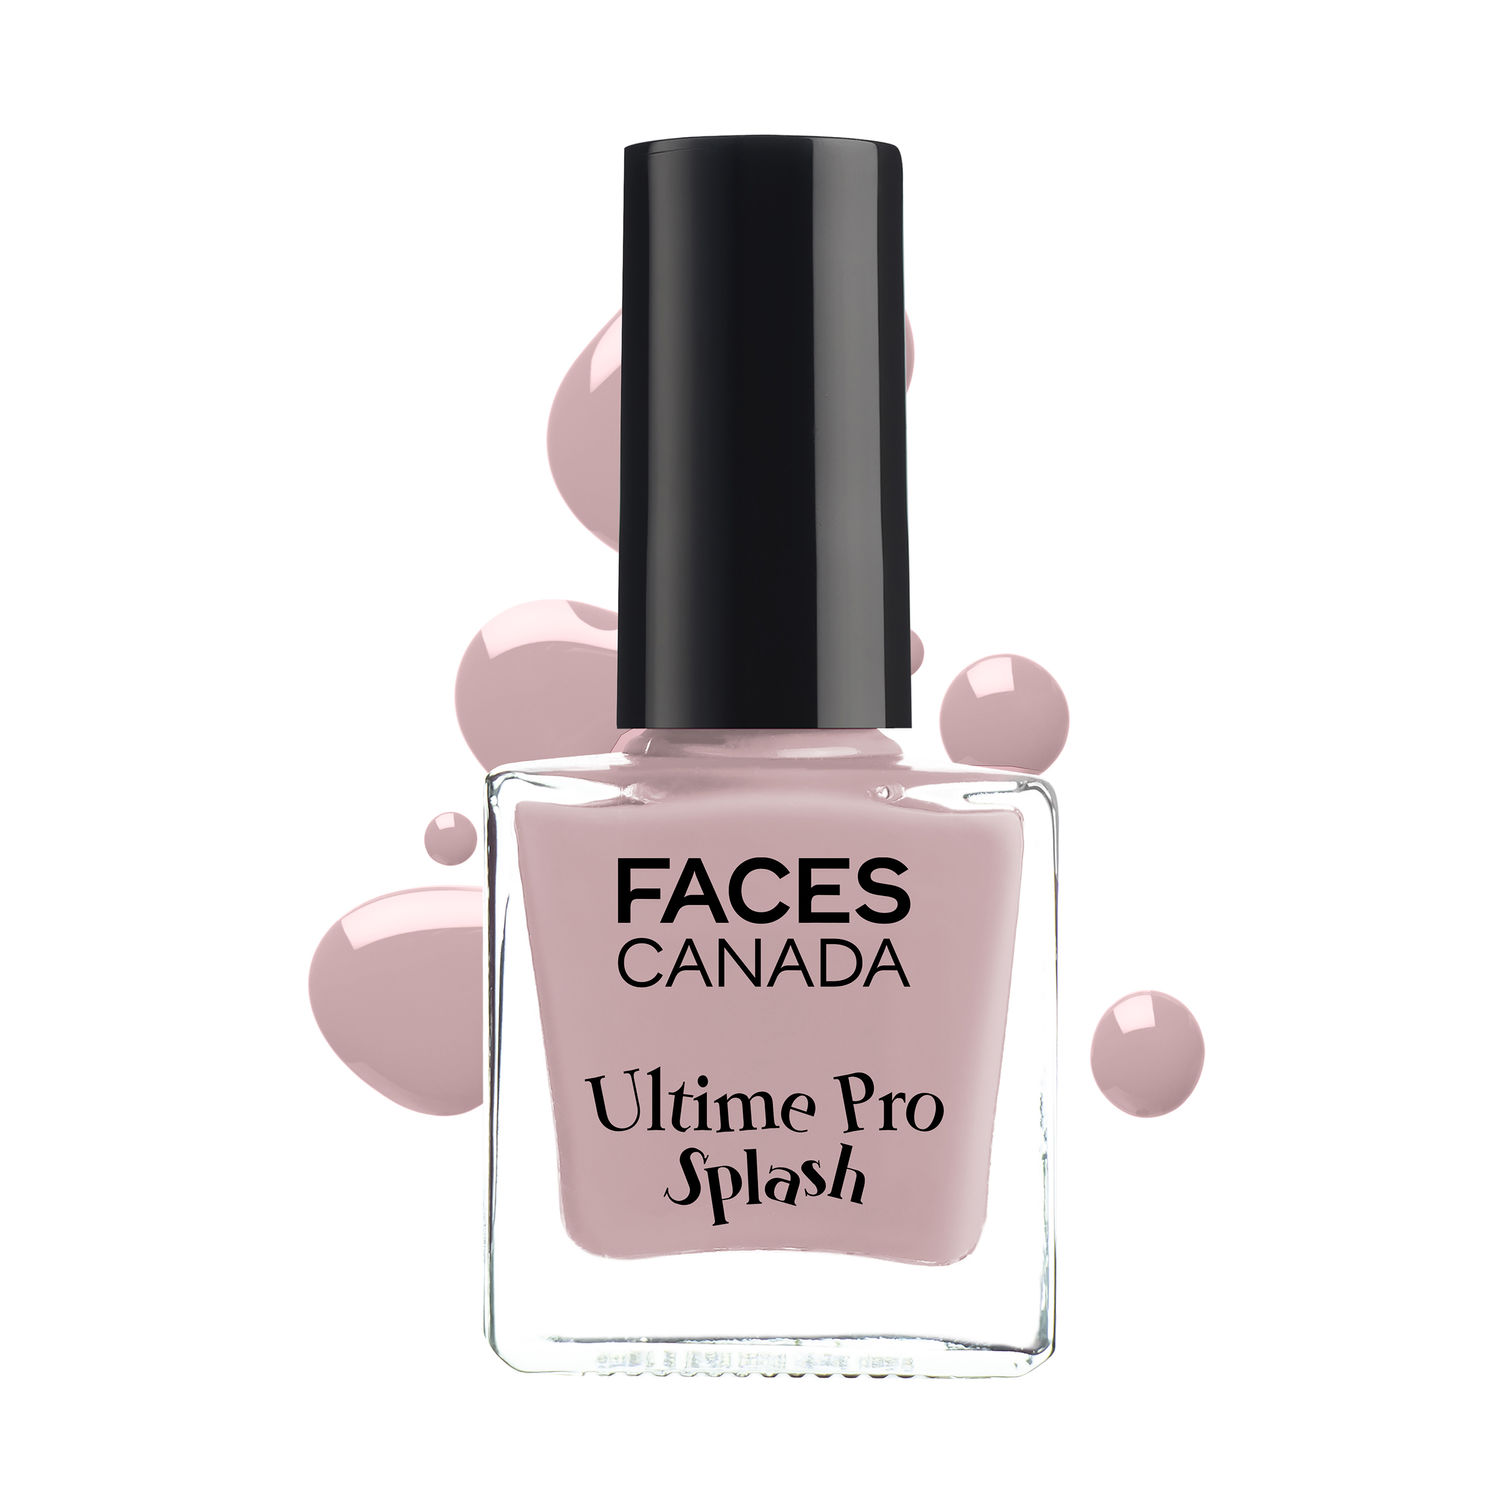 Faces Canada Splash Nail Polish Collection  Review  Swatches